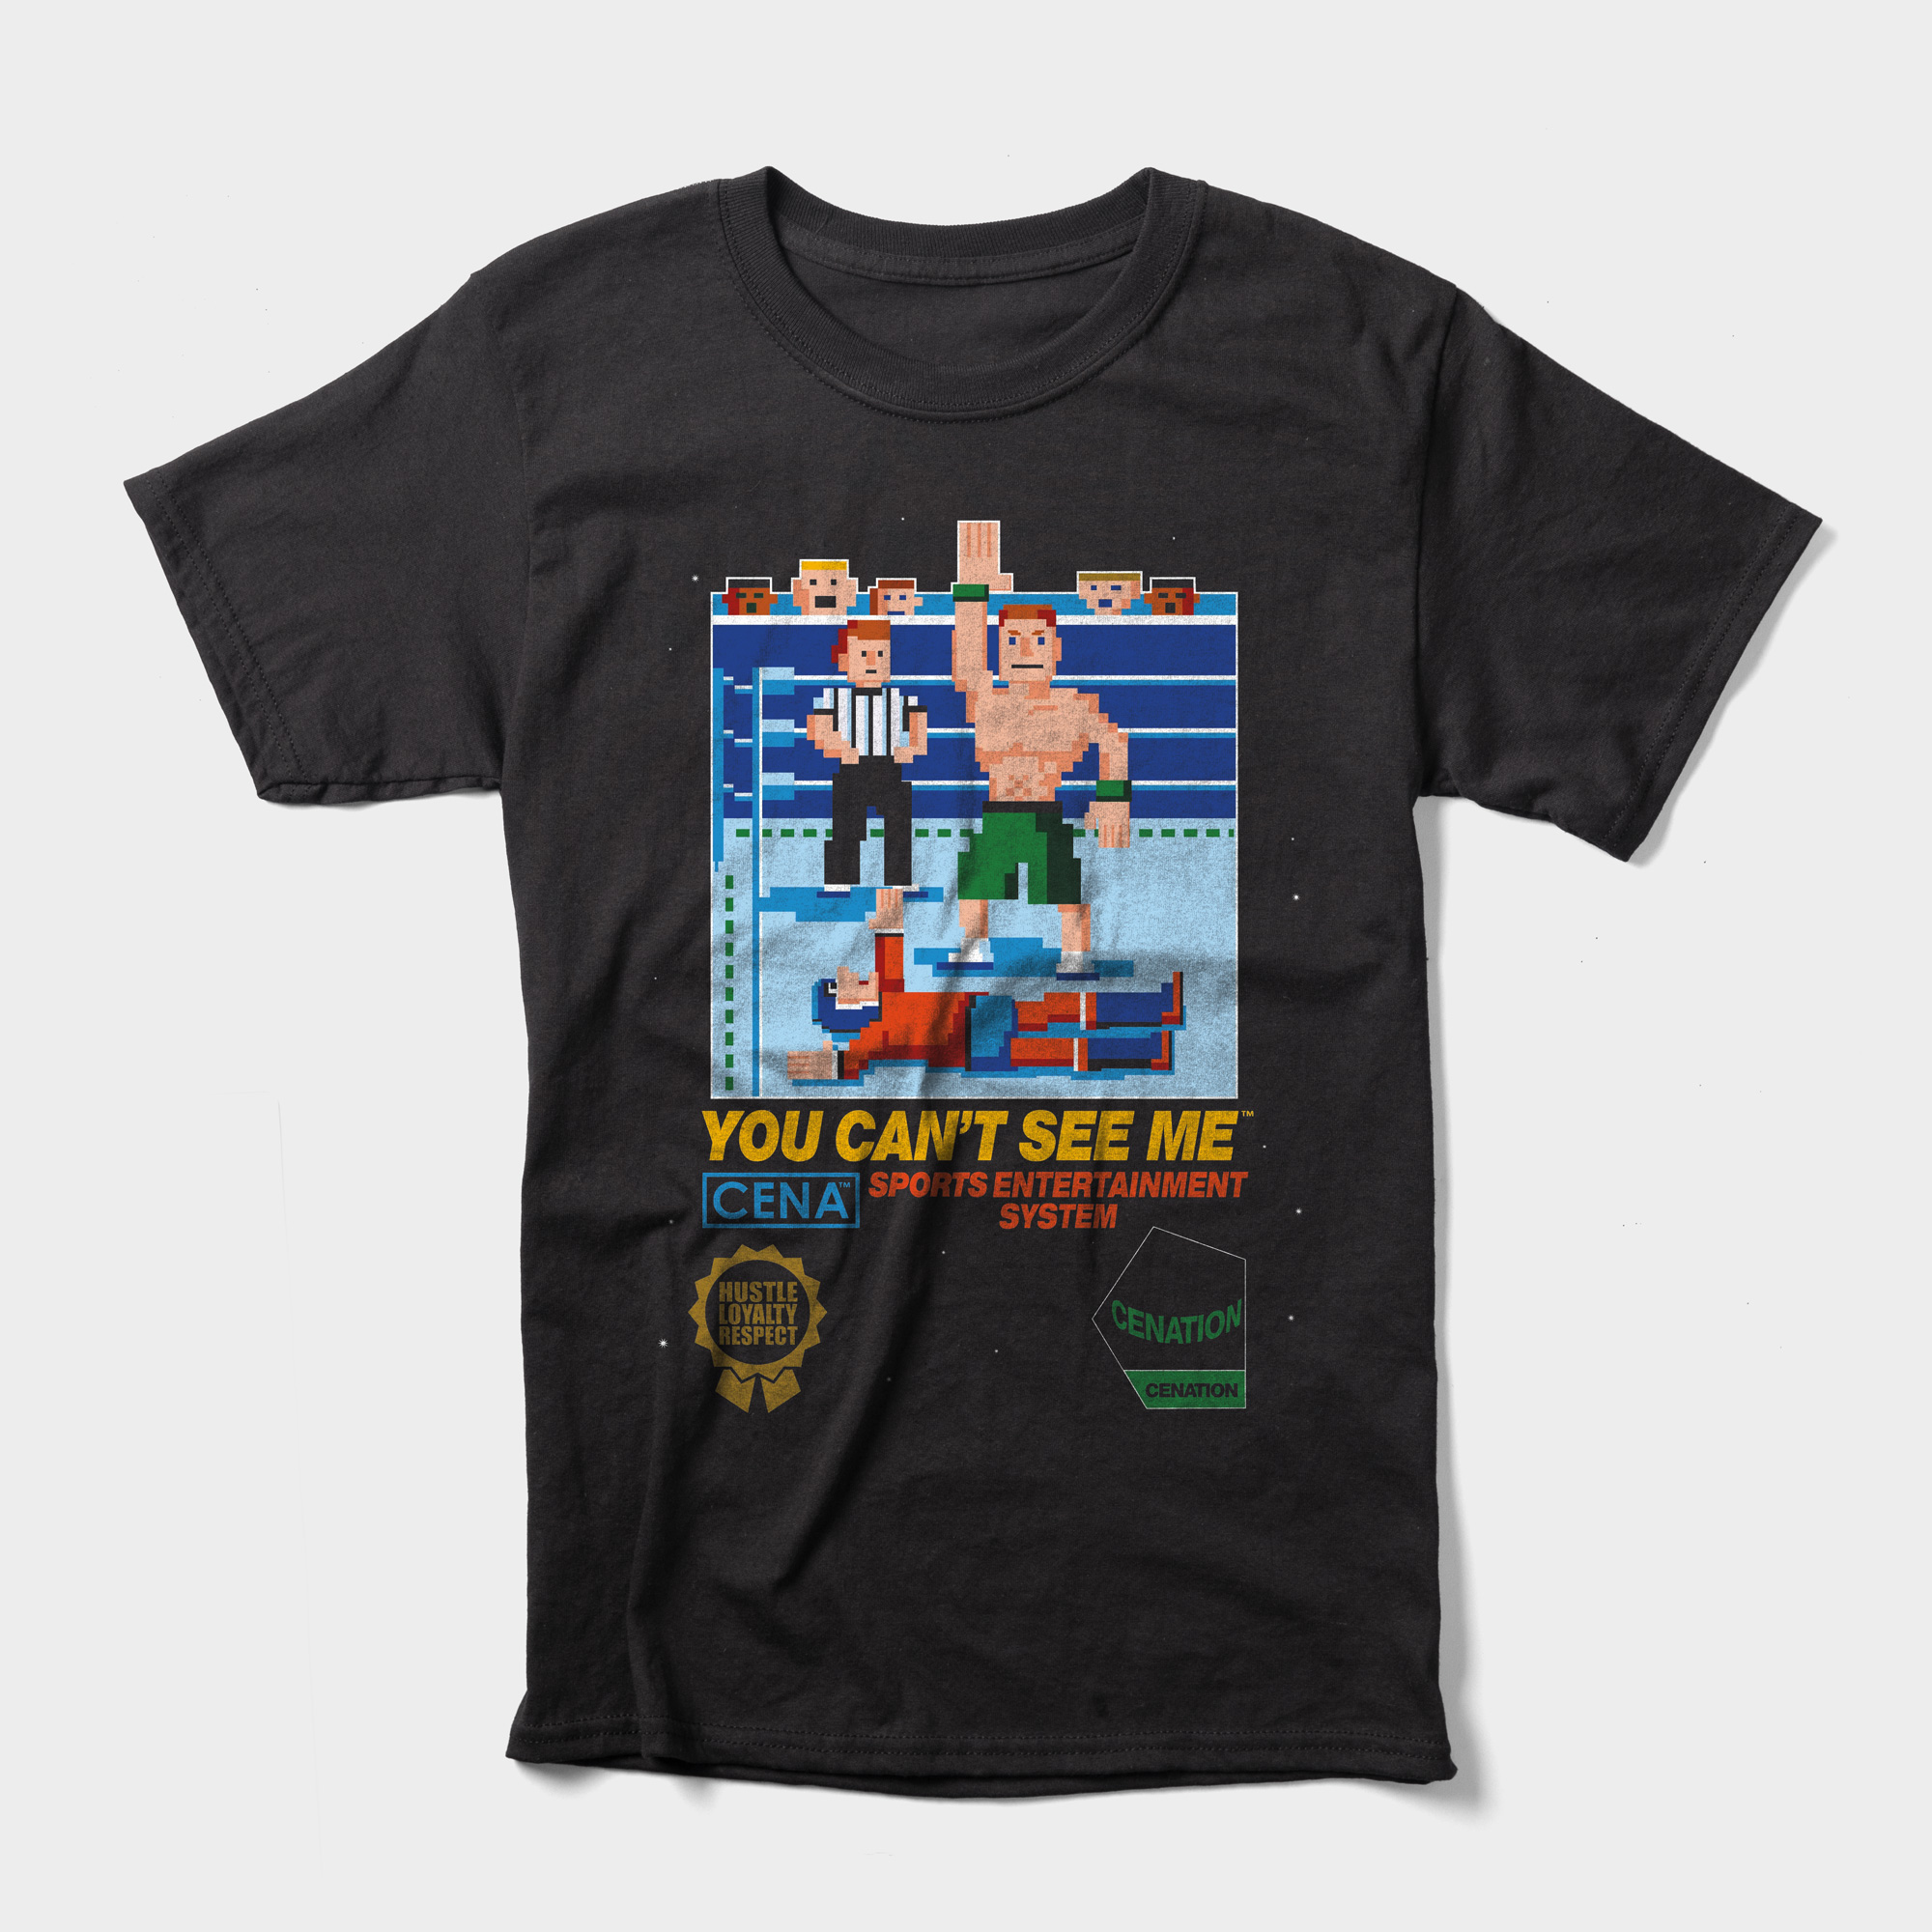 John Cena's 8-bit t-shirt added a video-game spin to his merch. 